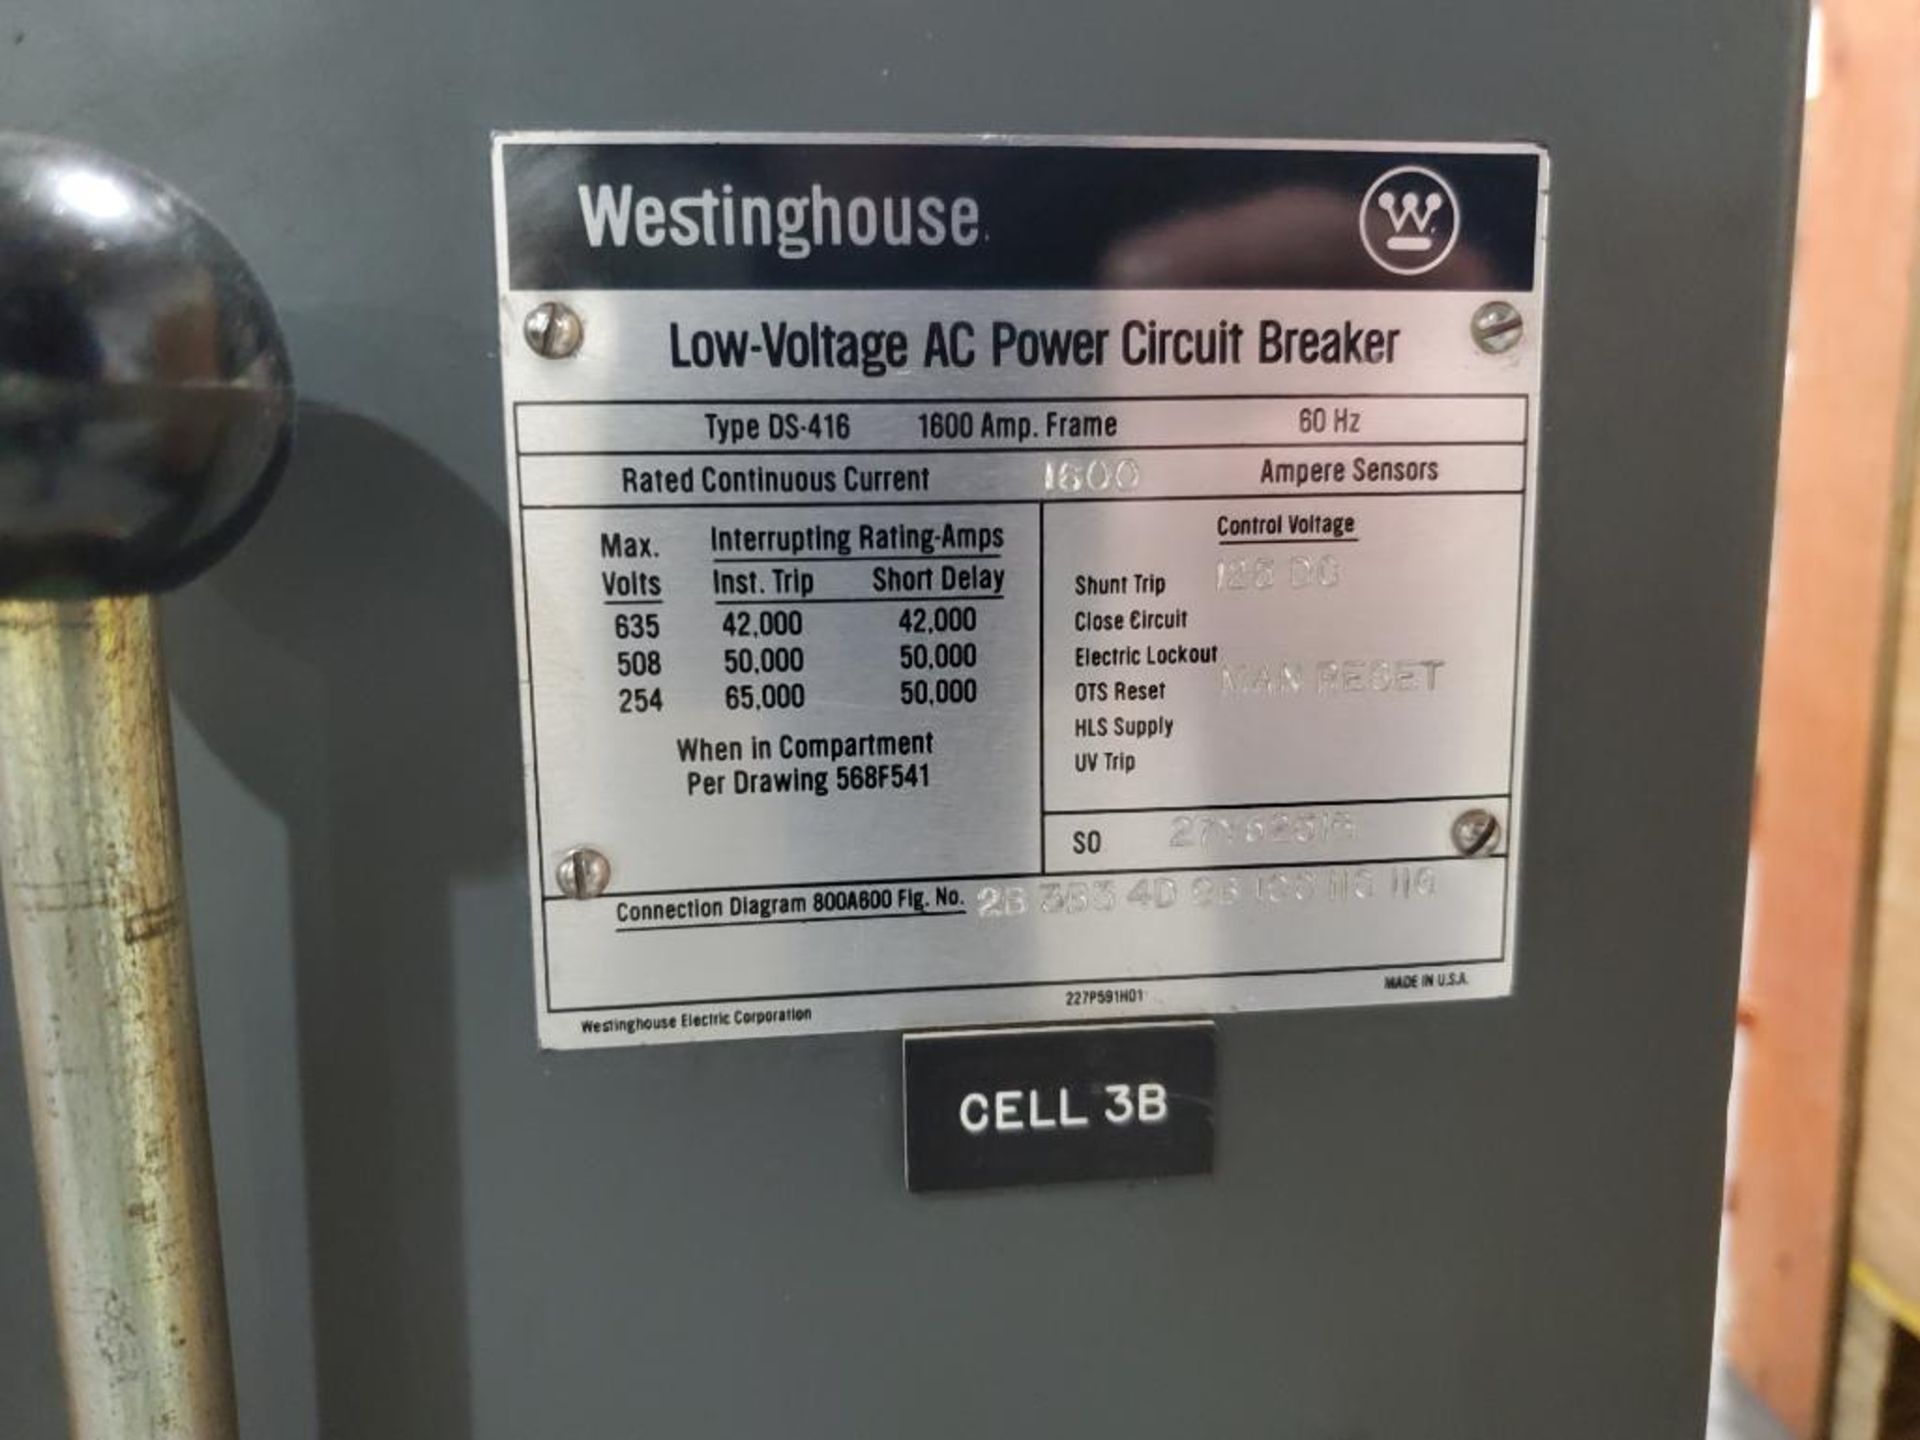 1600 amp Westinghouse Low Voltage AC Power Circuit Breaker. Type DS-416. - Image 4 of 9